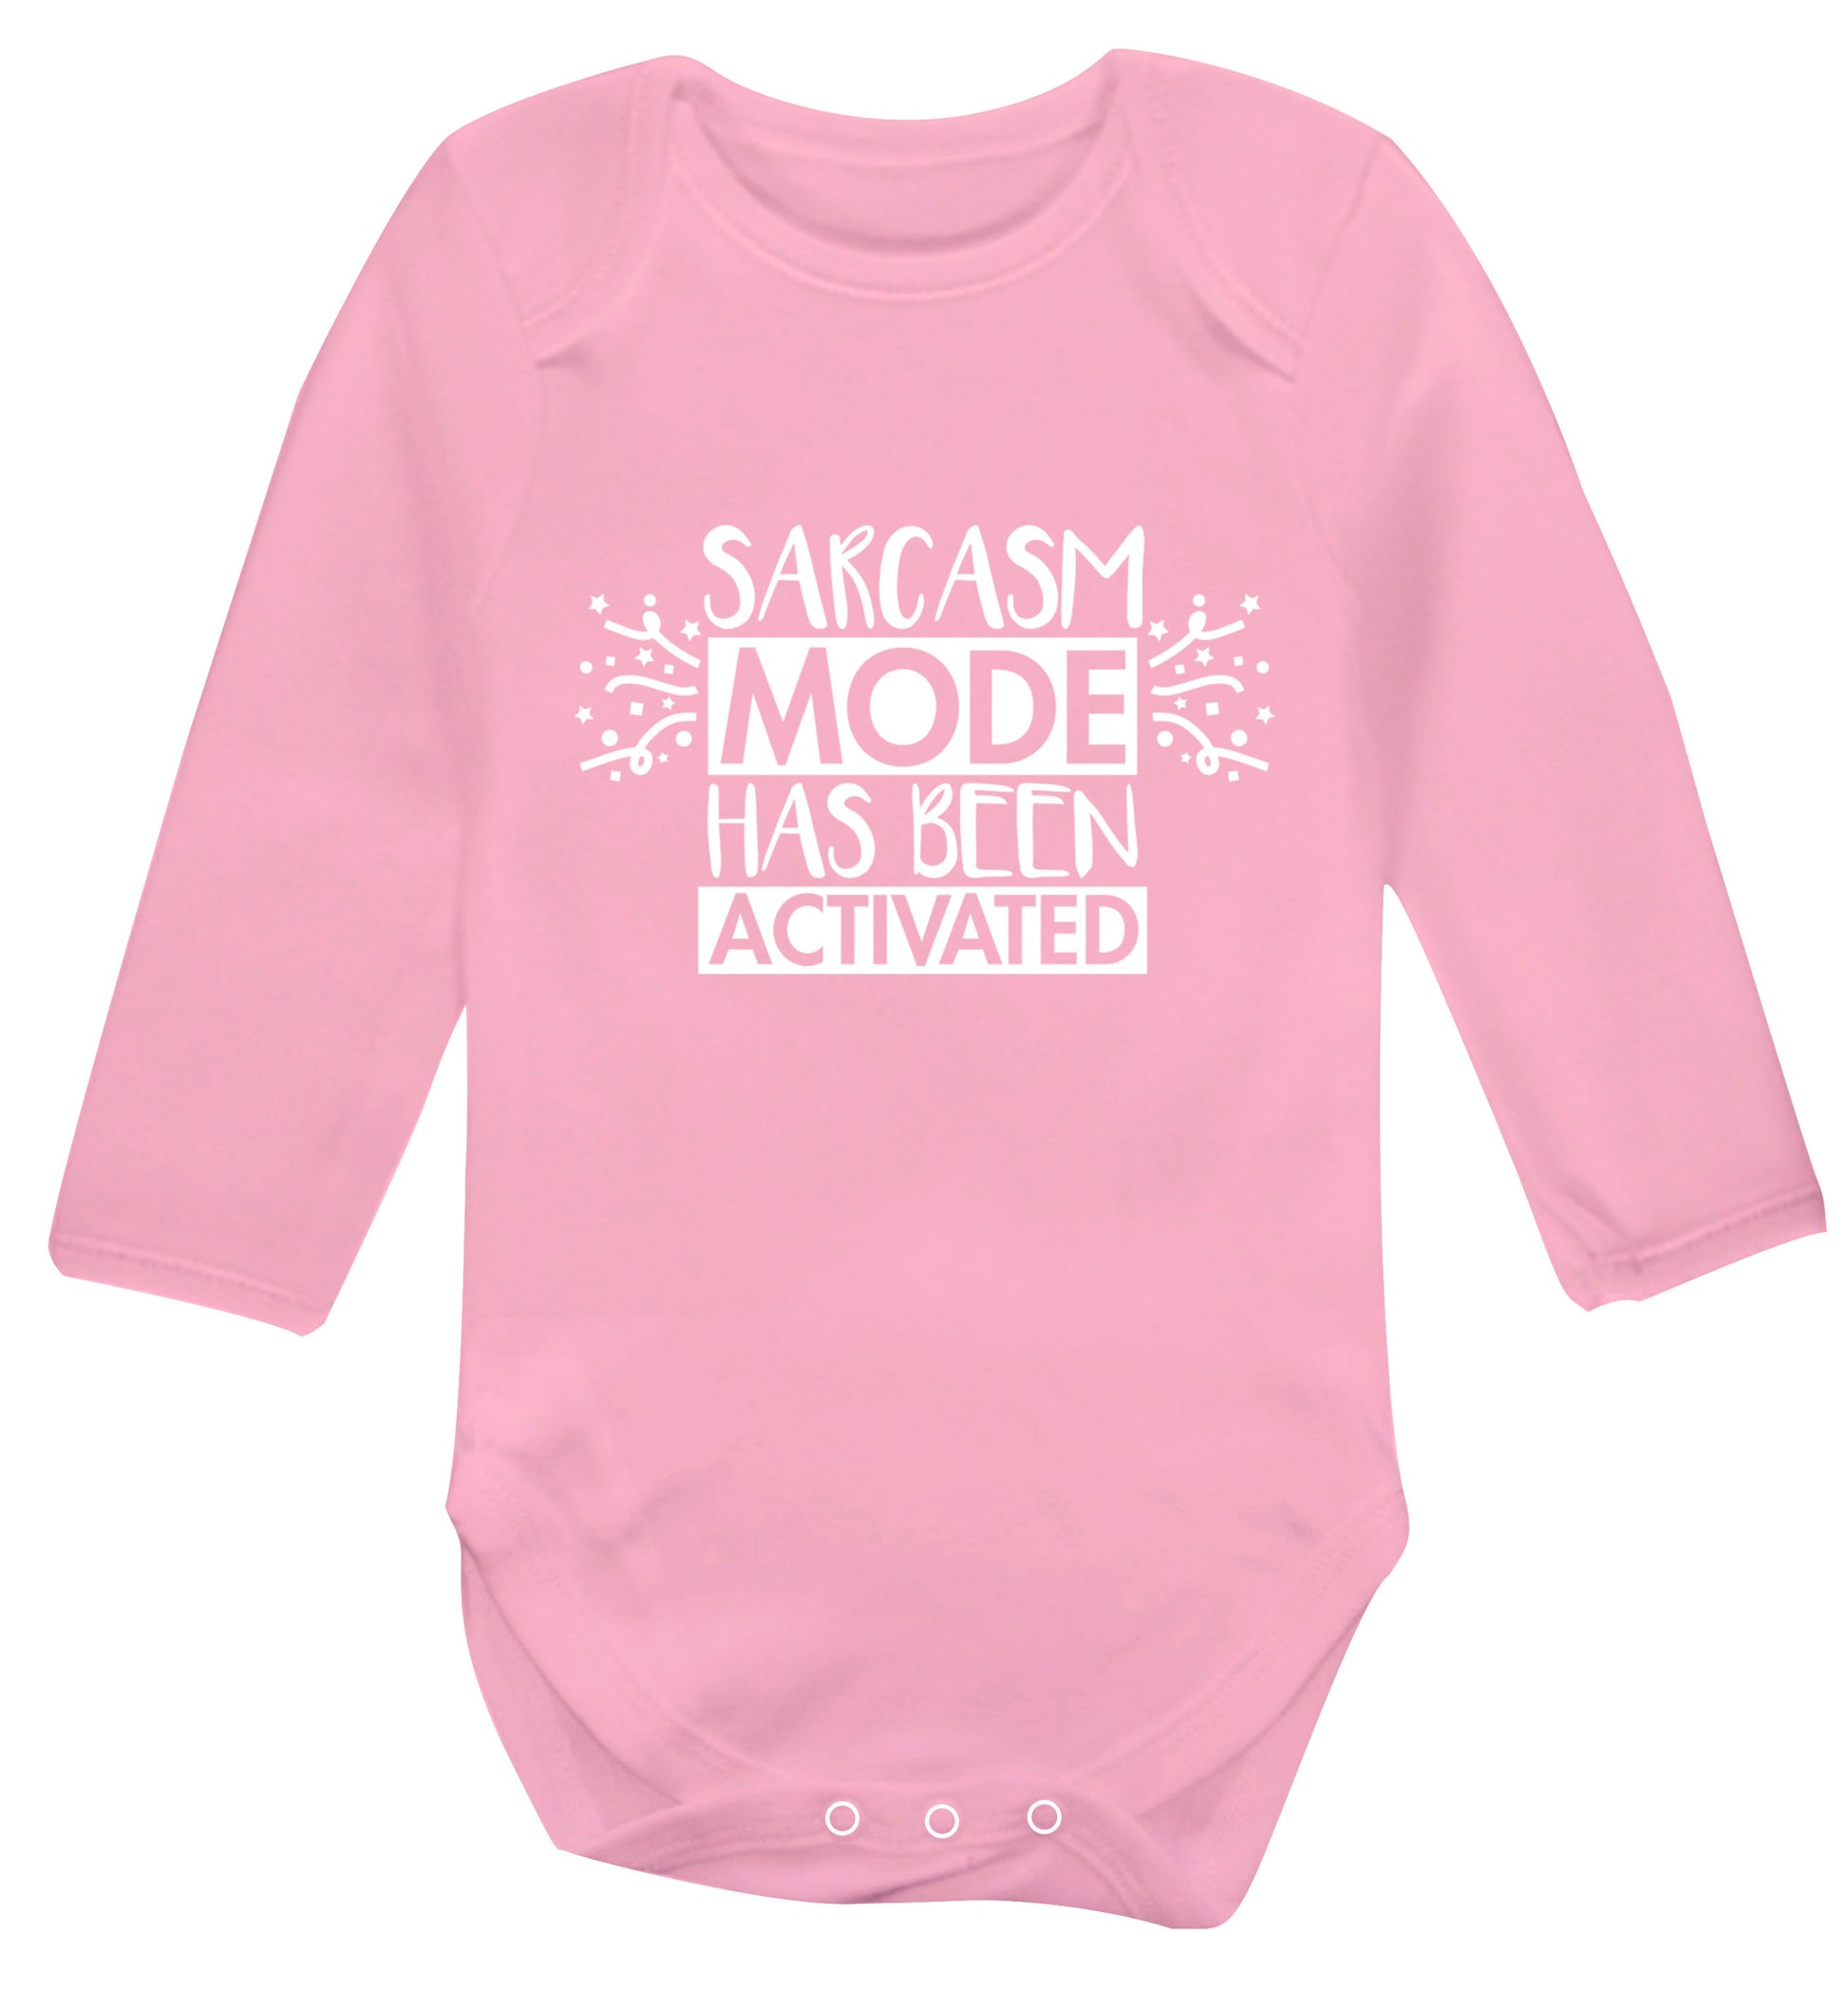 Sarcarsm mode has been activated Baby Vest long sleeved pale pink 6-12 months